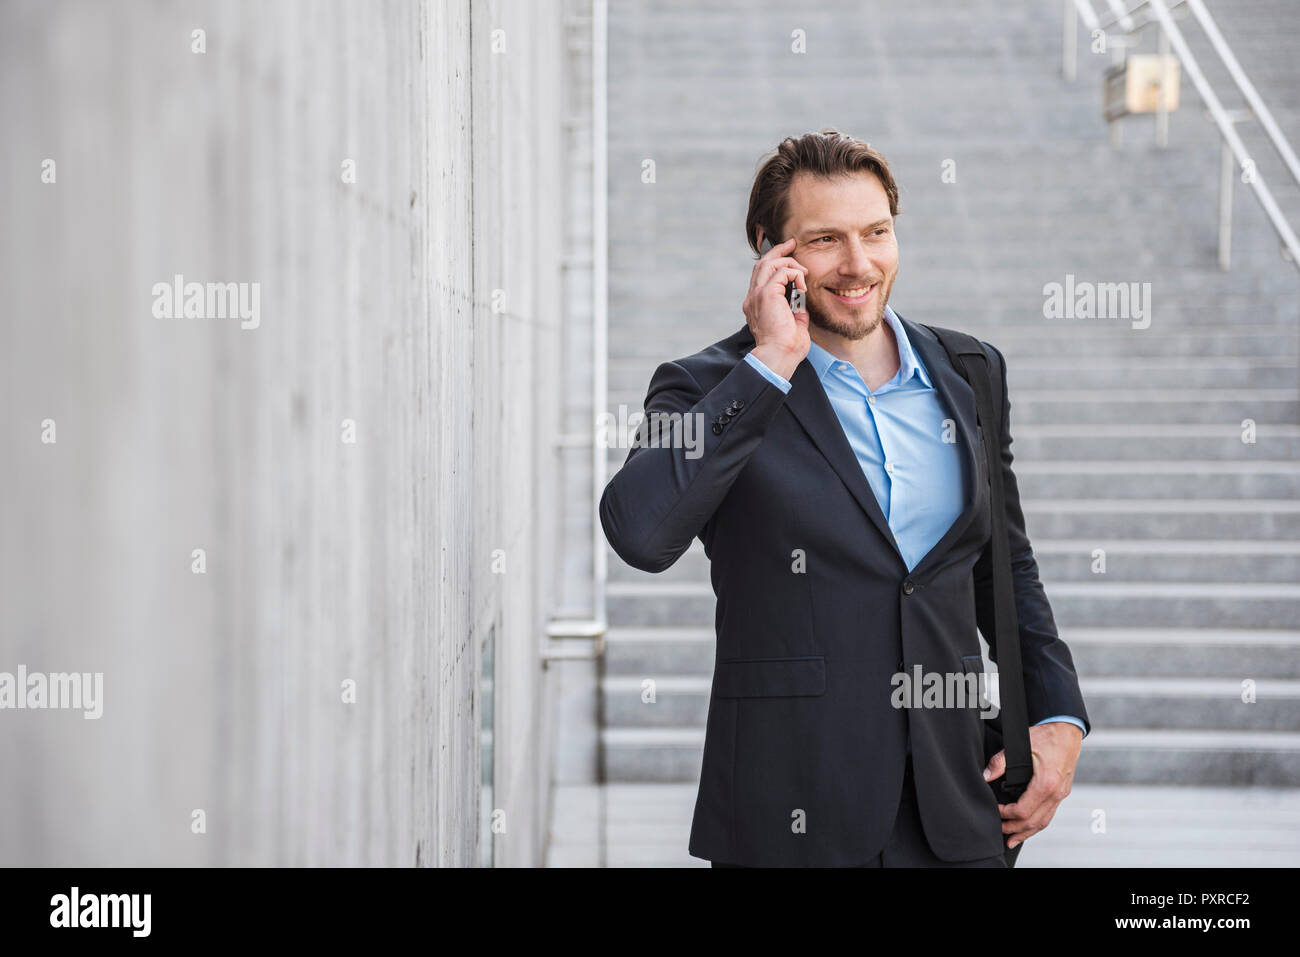 Smiling businessman at stairs talking on smartphone Stock Photo